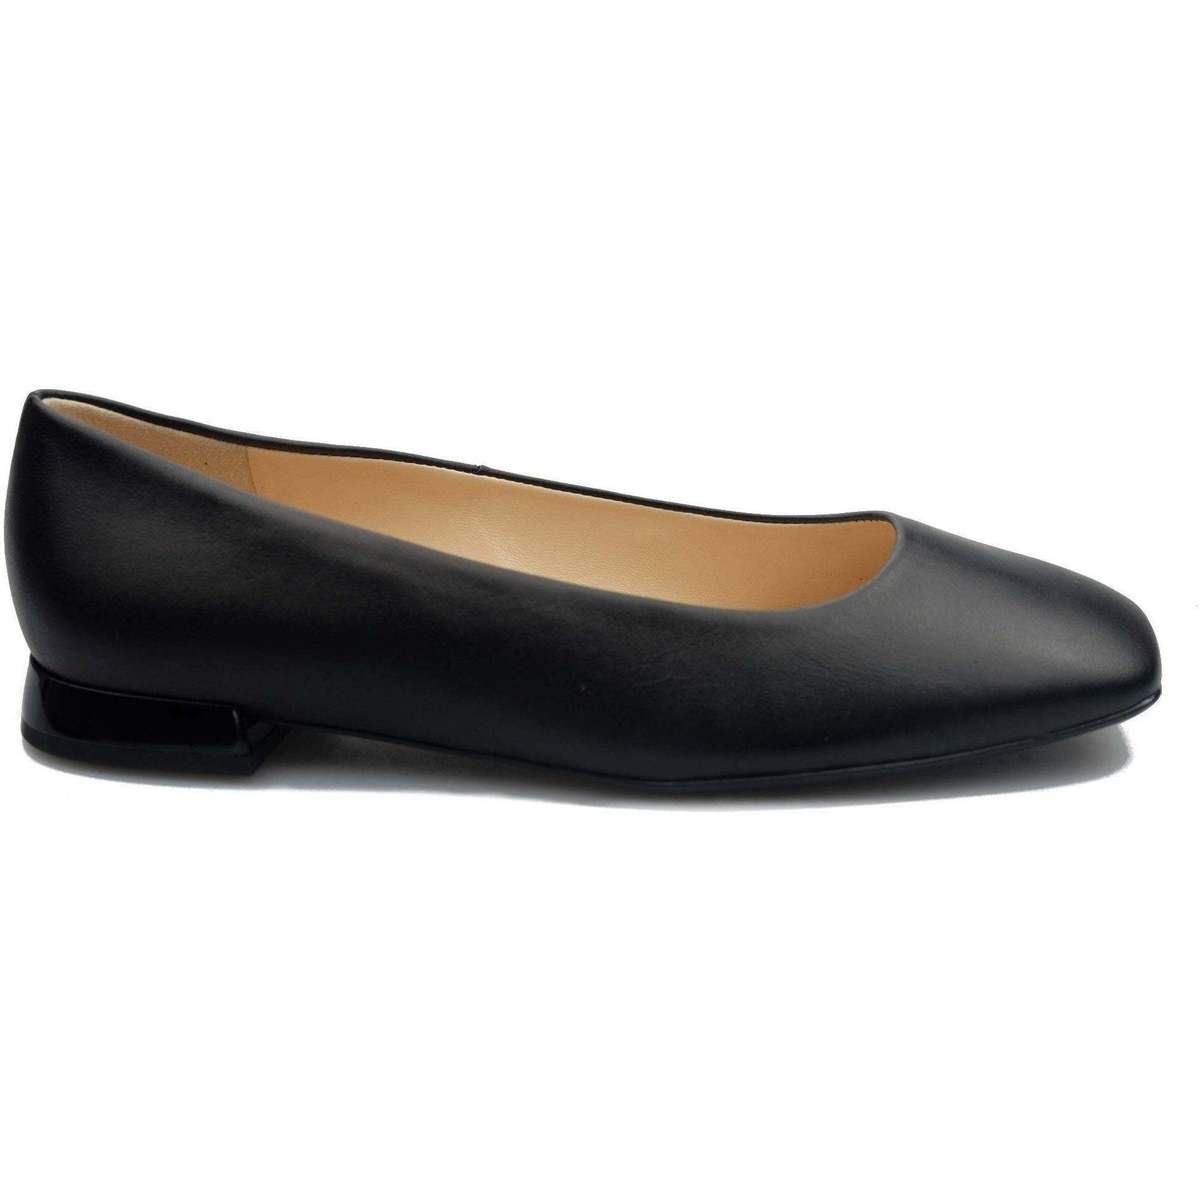 Högl - Pumps Black for Women by Spartoo GOOFASH